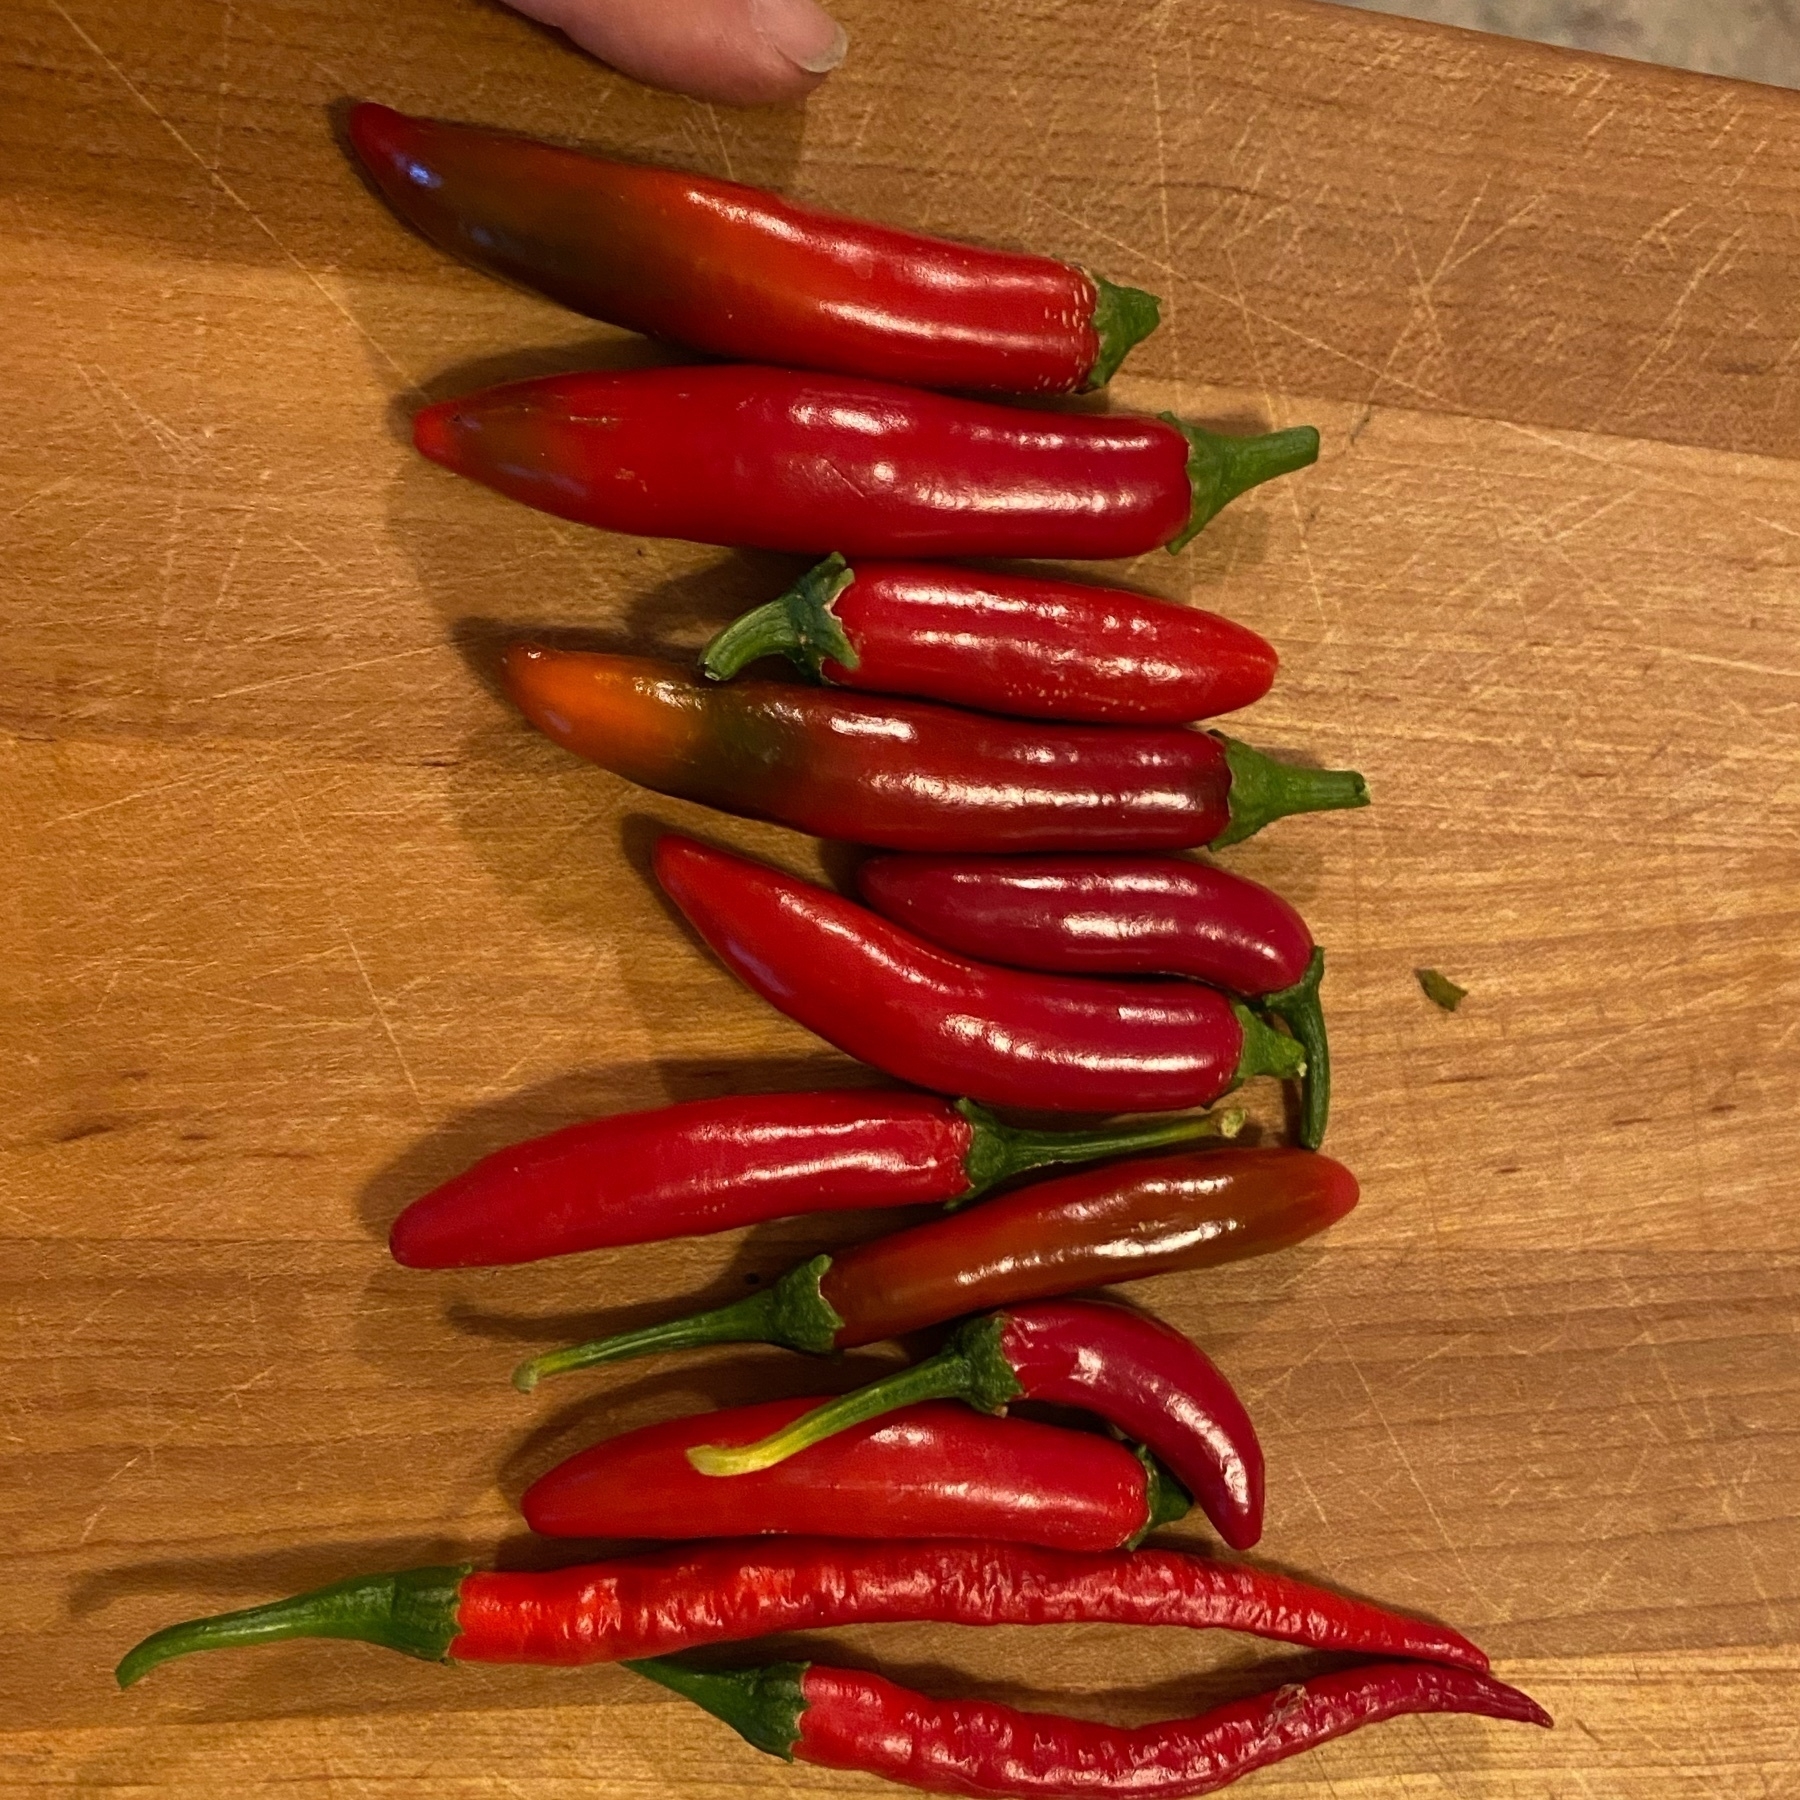 harvested ripe peppers, super shiny and red